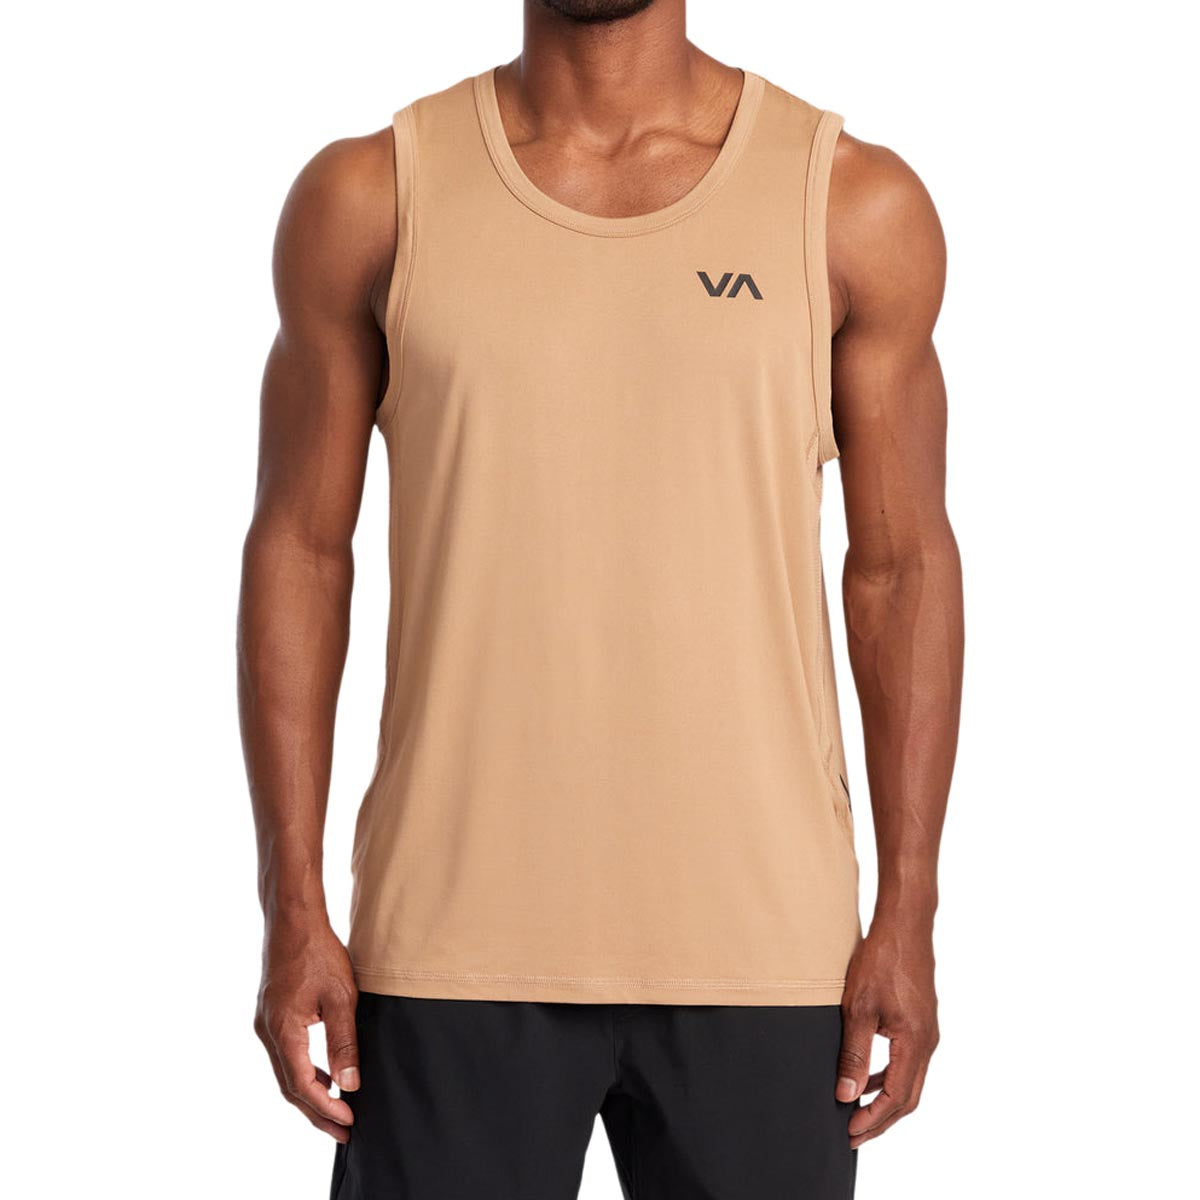 RVCA Sport Vent Sleeve Tank Top - Earth Clay image 1